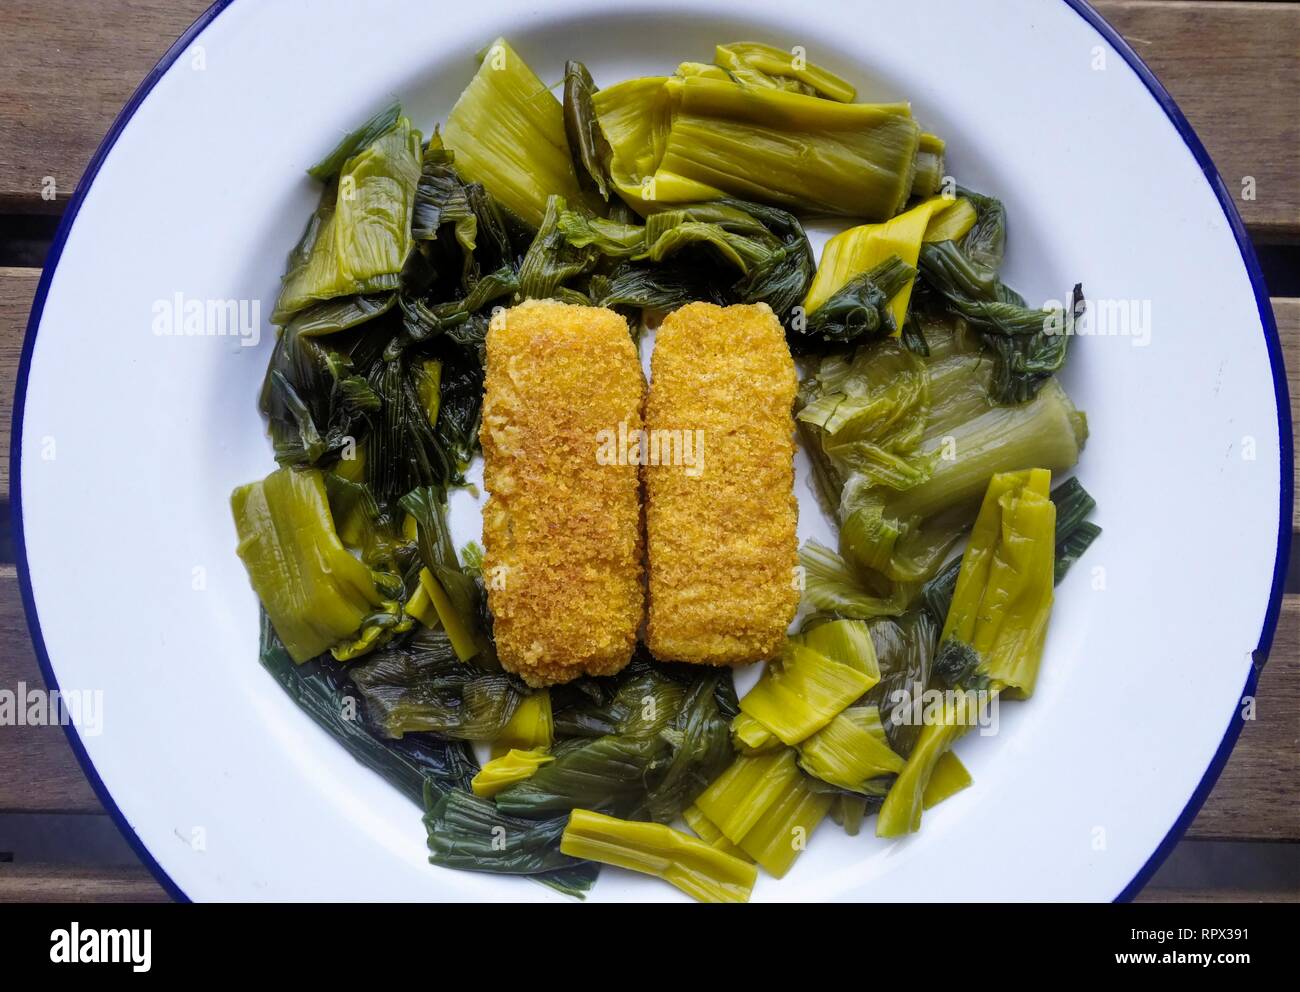 Healthy Meal of Stir Fried Leek Leaves with Fish Fingers Stock Photo